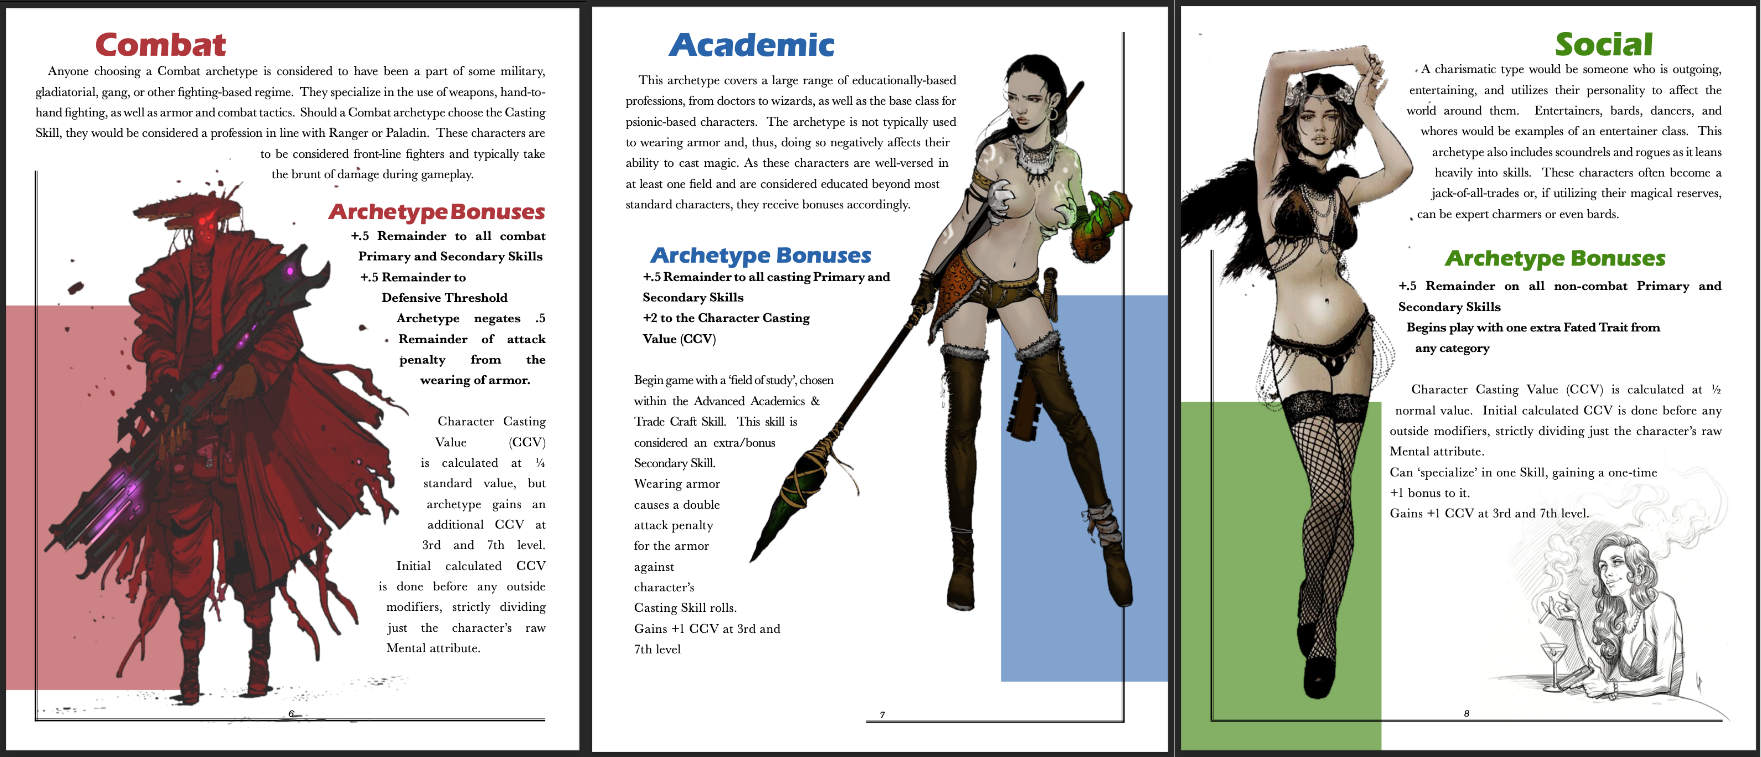 The pages for the combat, academic, and social archetypes. The character displayed on combat is a genderless alien with a big gun. The character displayed for academic is a woman standing with her hips emphasised and her torso leaning forwards to expose her breasts. She's wearing thigh high boots, panties, and some implausible bone bra that has fingers holding from the sides, and carries a spear. The character for social is wearing fishnet stockings and beaded bikini style lingere